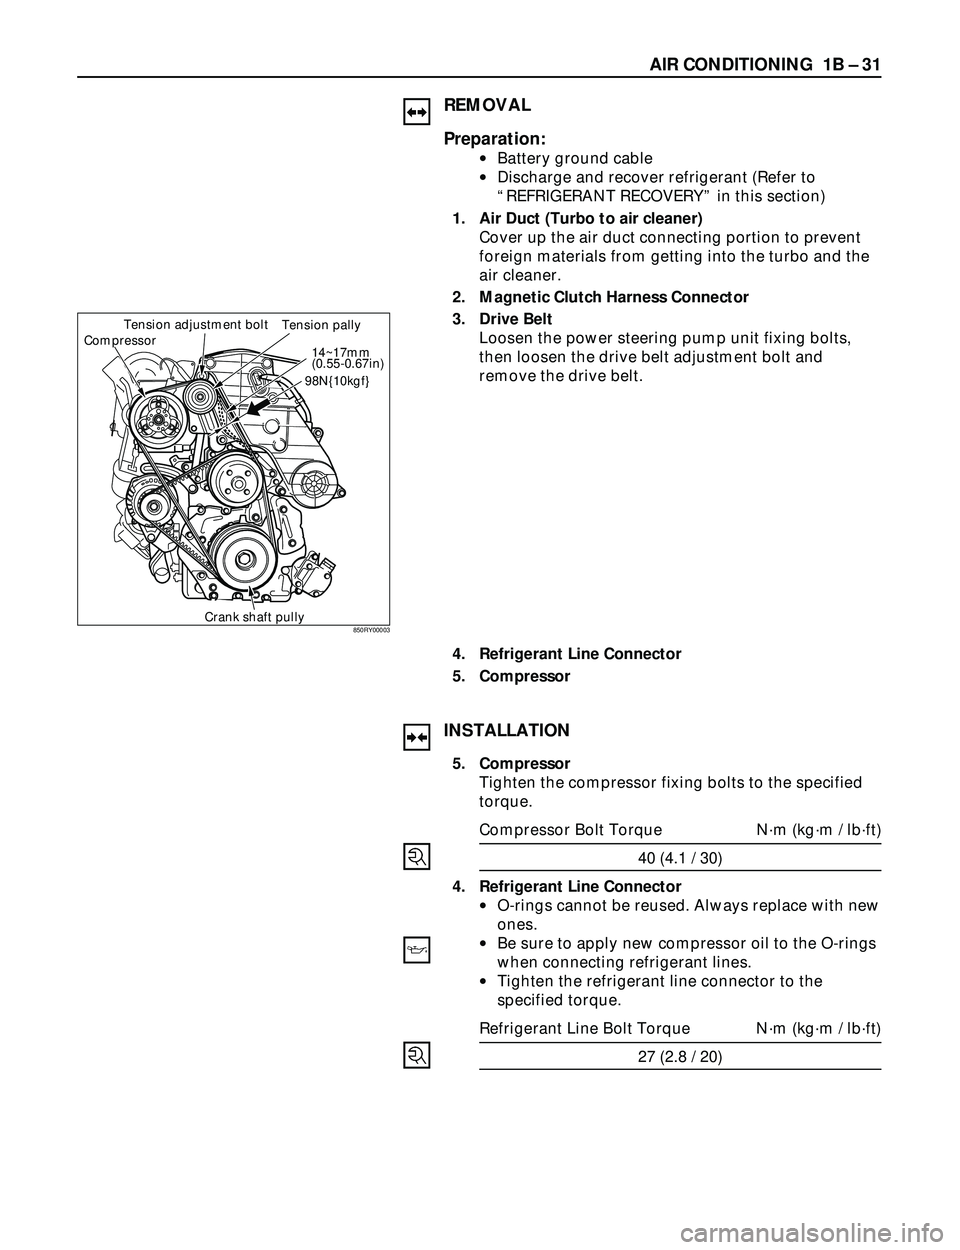 ISUZU TROOPER 1998  Service Repair Manual AIR CONDITIONING  1B Ð 31
REMOVAL
Preparation:
·Battery ground cable
·Discharge and recover refrigerant (Refer to
ÒREFRIGERANT RECOVERYÓ in this section) 
1. Air Duct (Turbo to air cleaner)
Cover